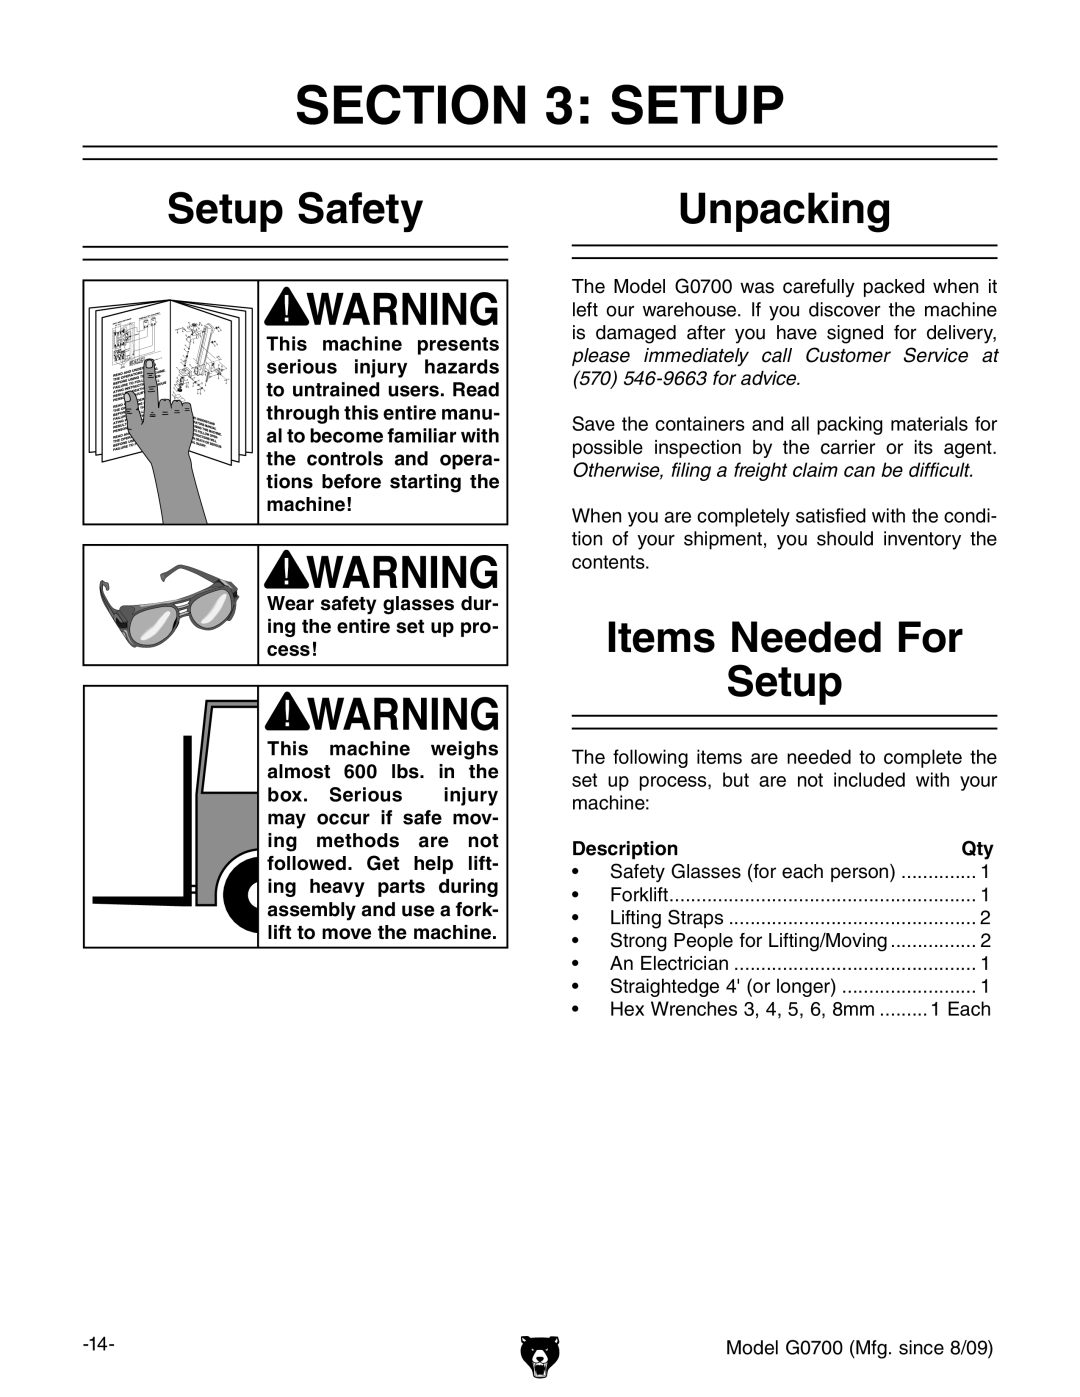 Grizzly G0700 owner manual Setup Safety, Unpacking, Items Needed For Setup 